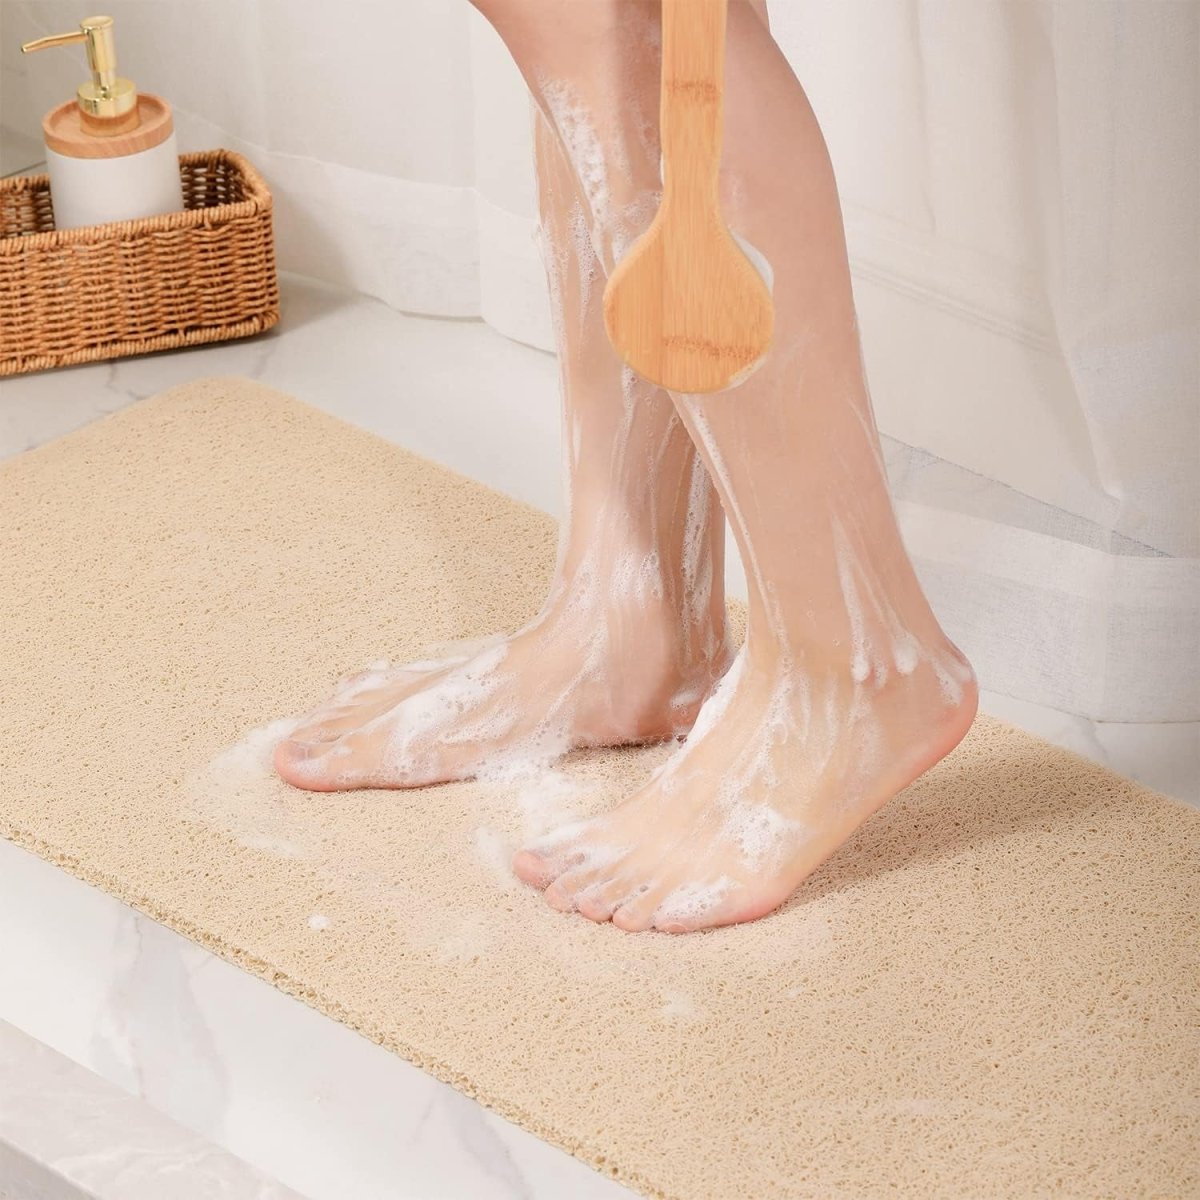 Quick-Dry Loofah Shower Mat - Non-Slip, Super Soft, and Mold-Resistant - Slips Away - B0BX2ZTQ6K -